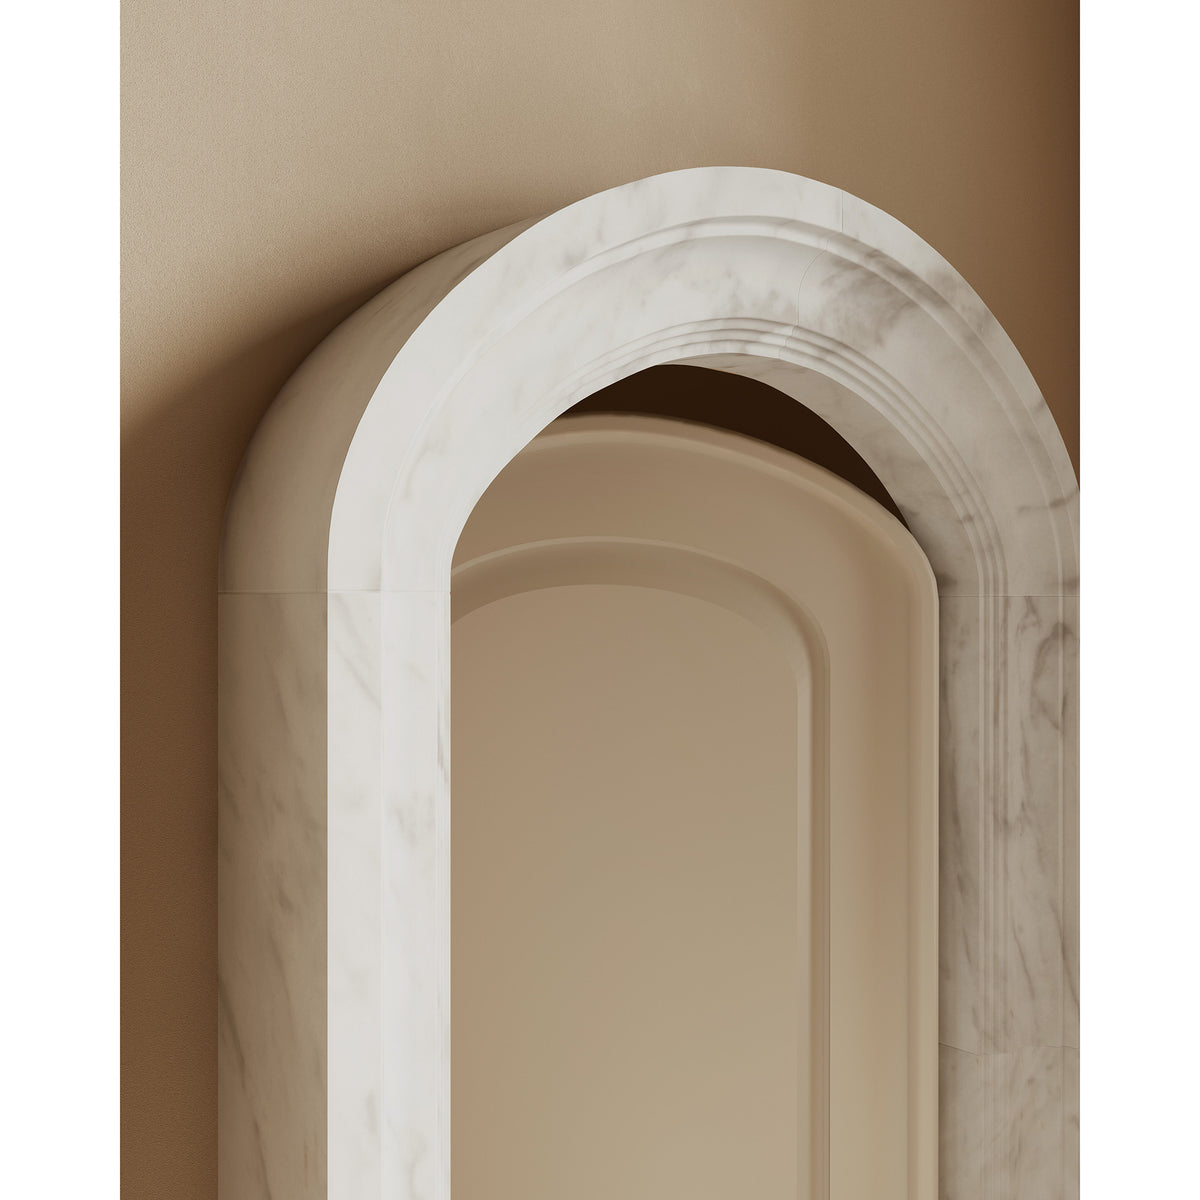 Provence Door Surround shown in Transitional Profile with Danby Marble. Main Product Slider View